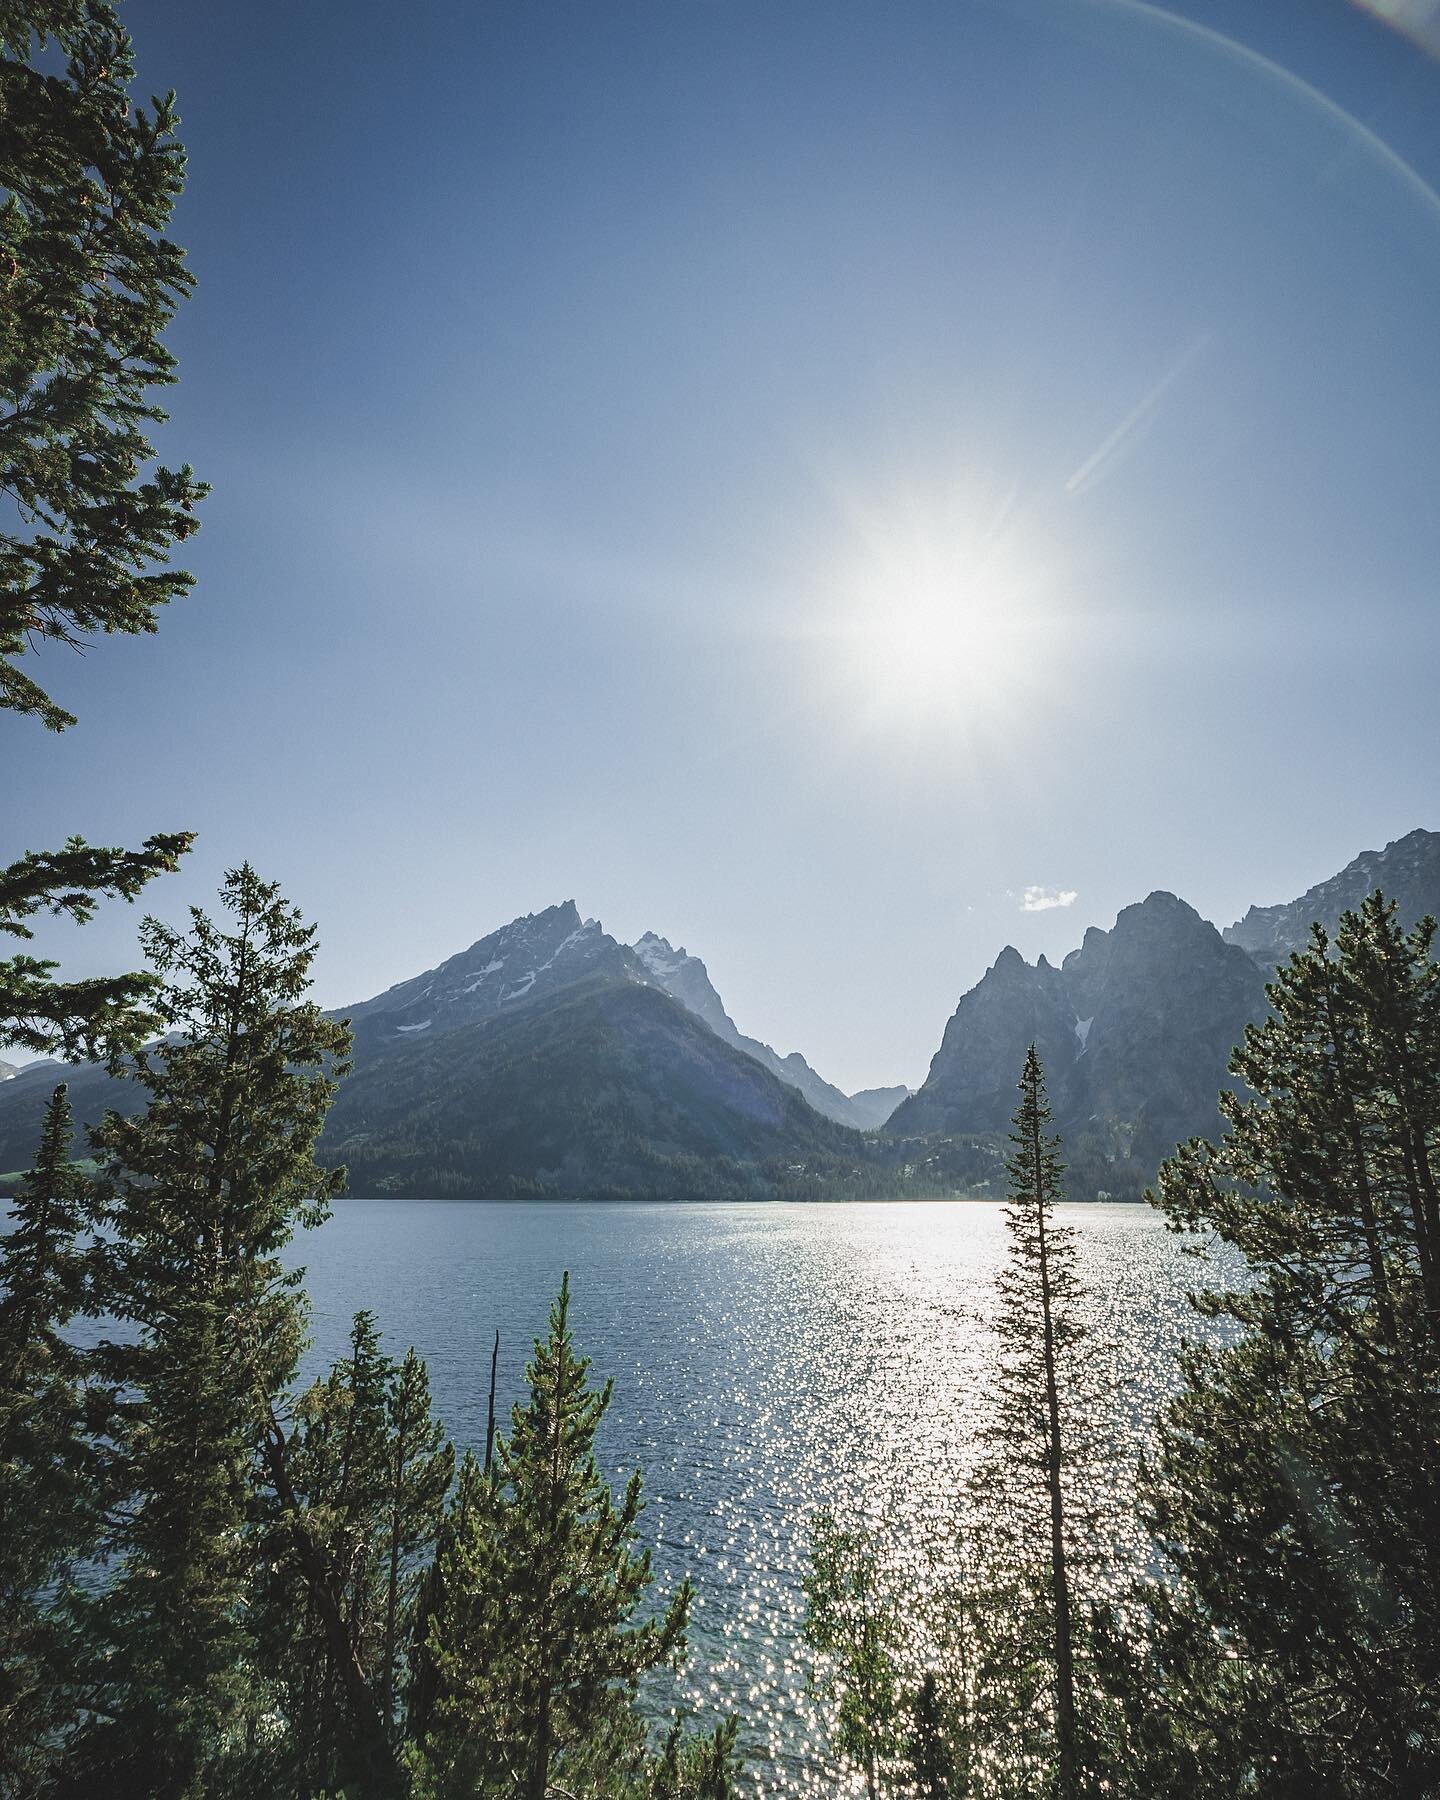 What we all need is a touch of sunshine, a bit of water, and some ancient giants to put existence into perspective. ☄️⚡️☀️⛰
I had the epic honor of cruising through Grand Teton National Park a bit ago, and, though living in Colorado most of my younge